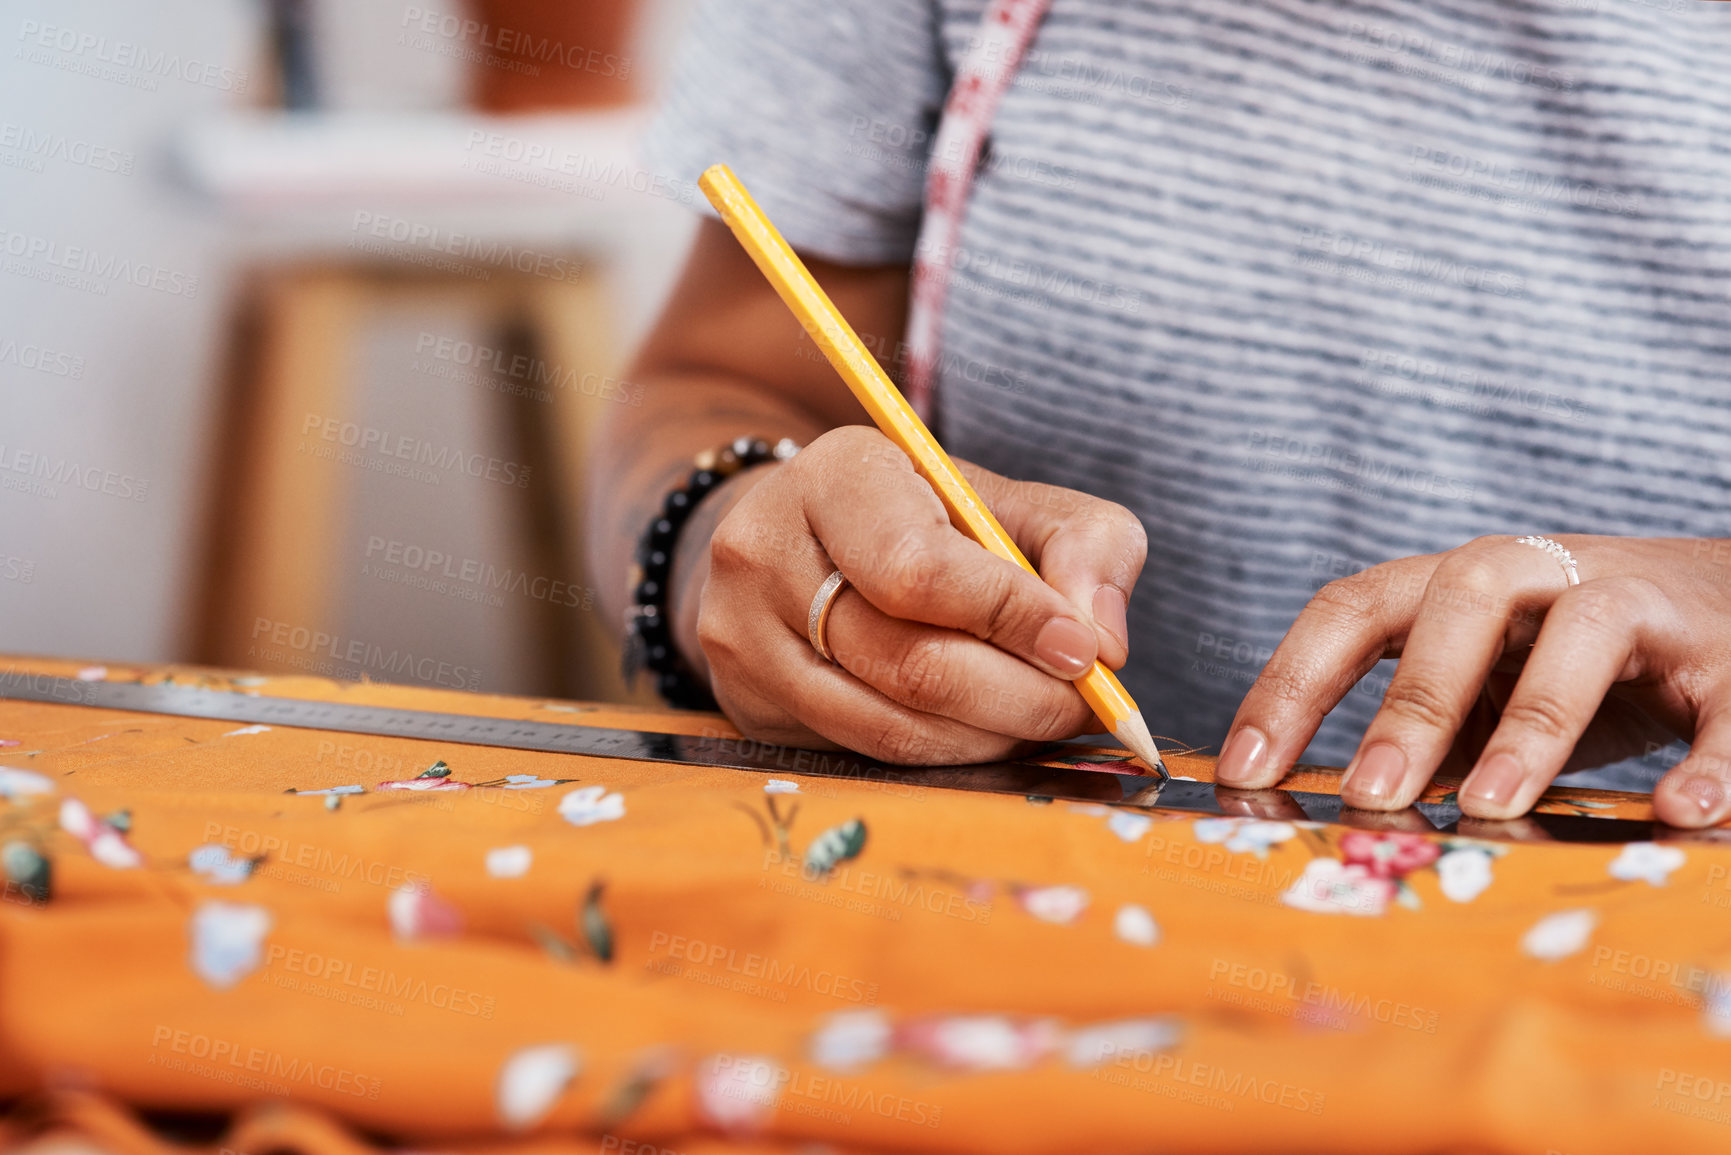 Buy stock photo Cropped shot of a young woman designing a garment at home